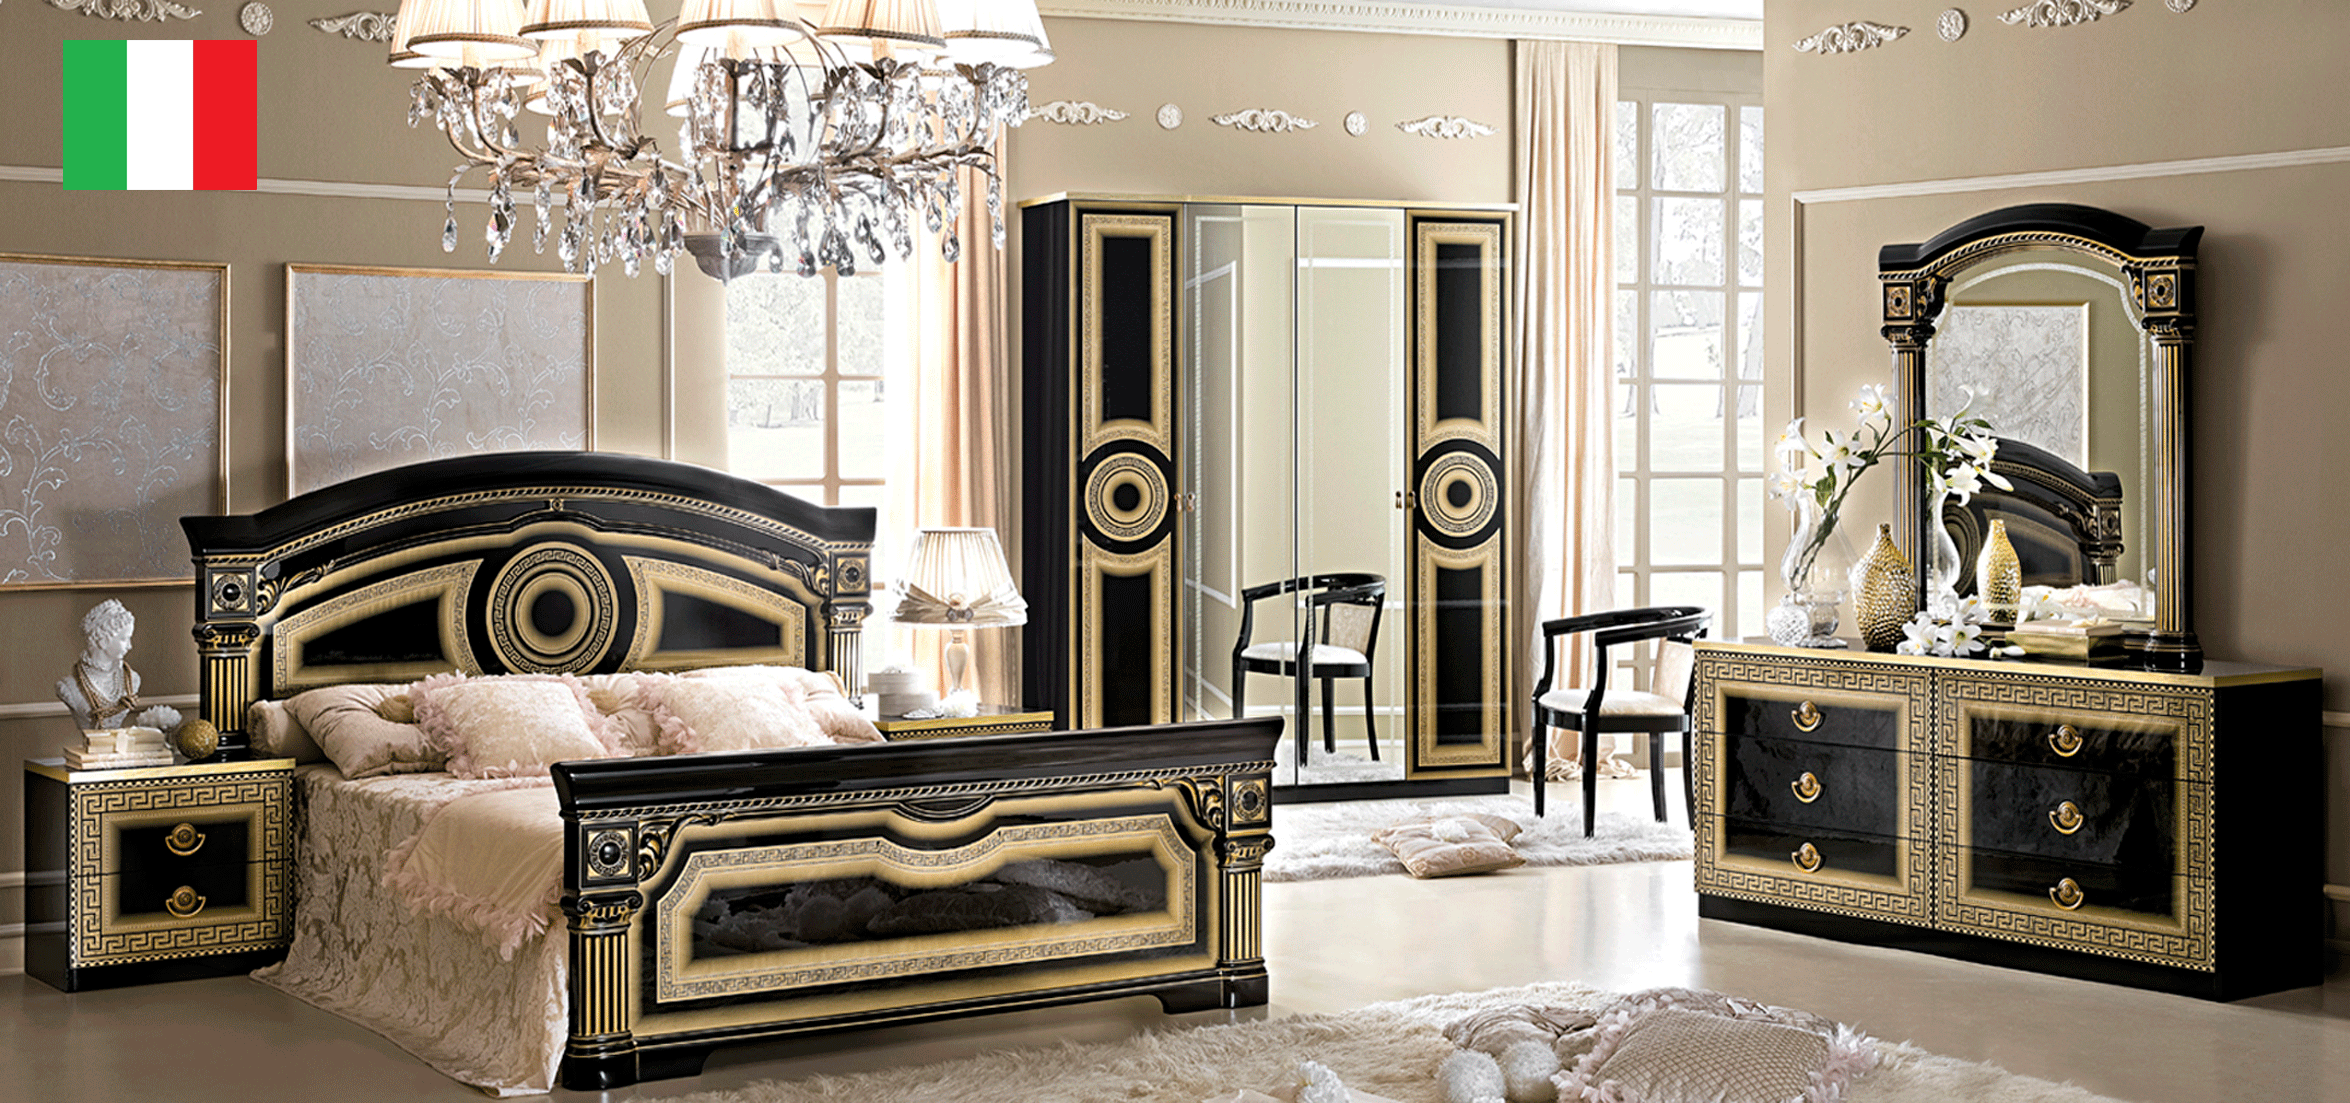 Bedroom Furniture Modern Bedrooms QS and KS Aida Bedroom Black w/Gold, Camelgroup Italy